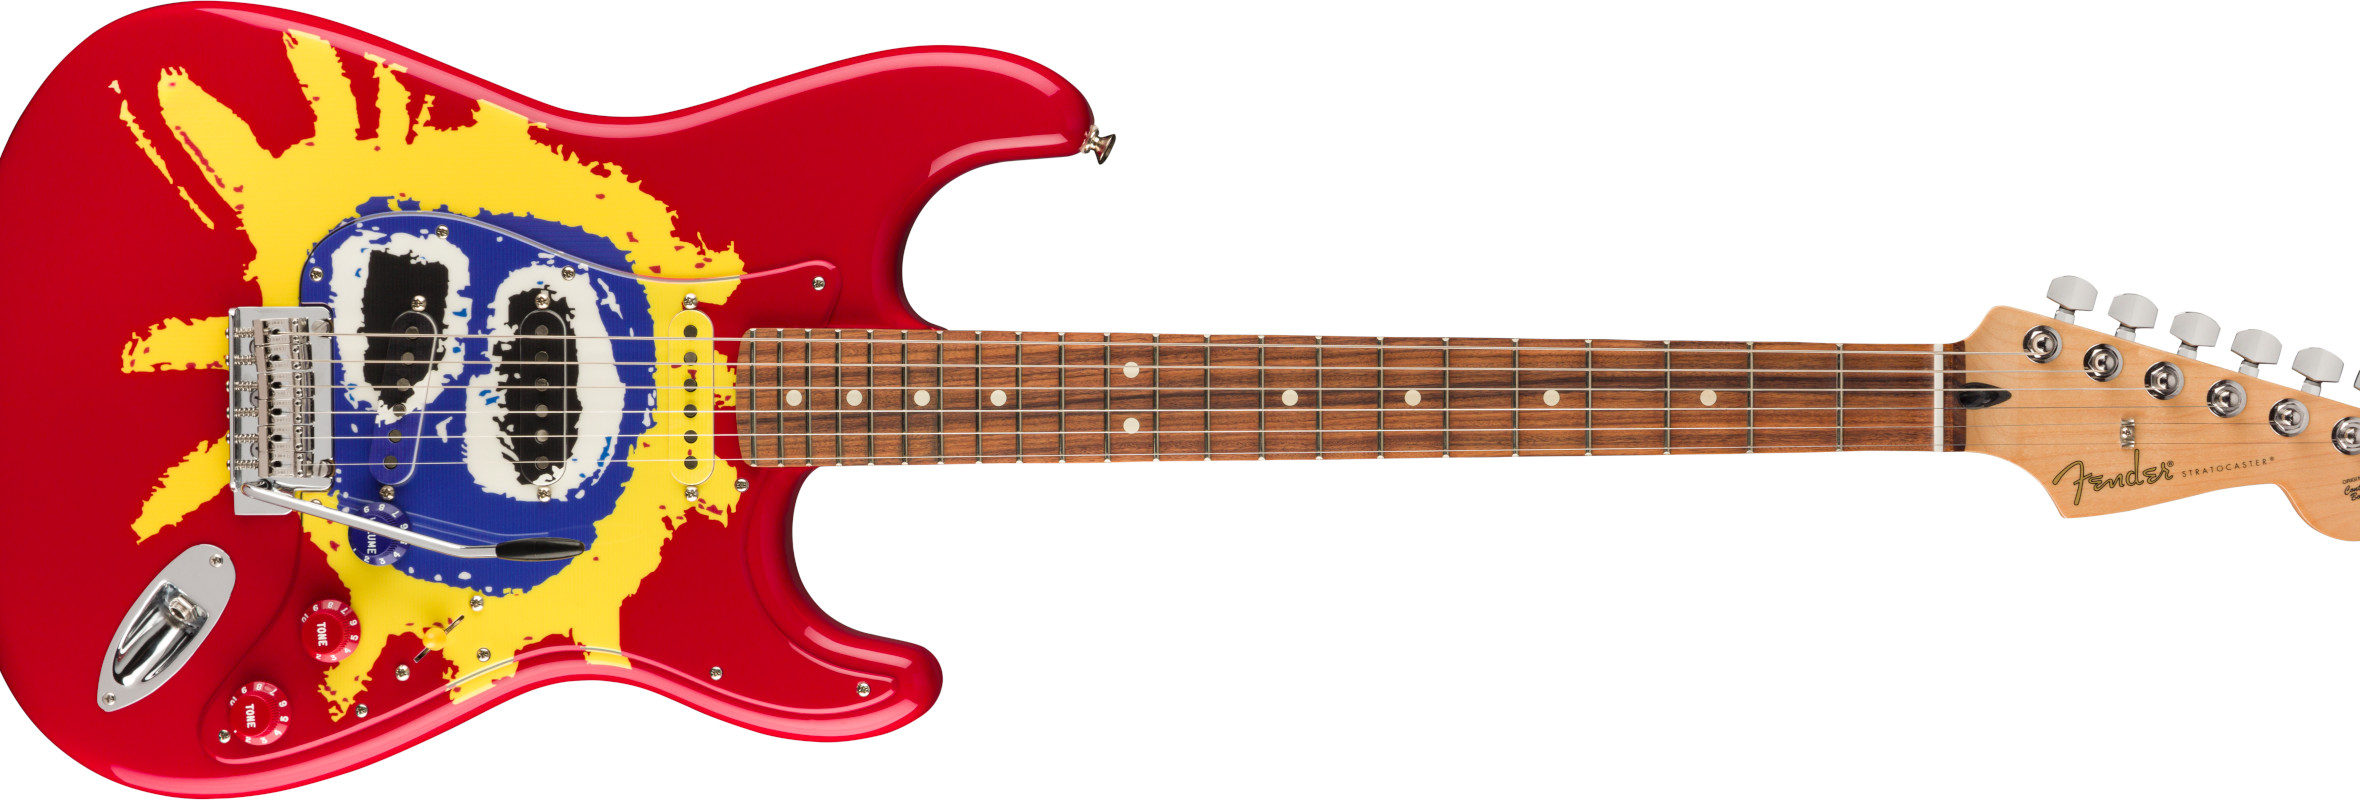 Gear Review: 30th Anniversary Screamadelica Fender Stratocaster